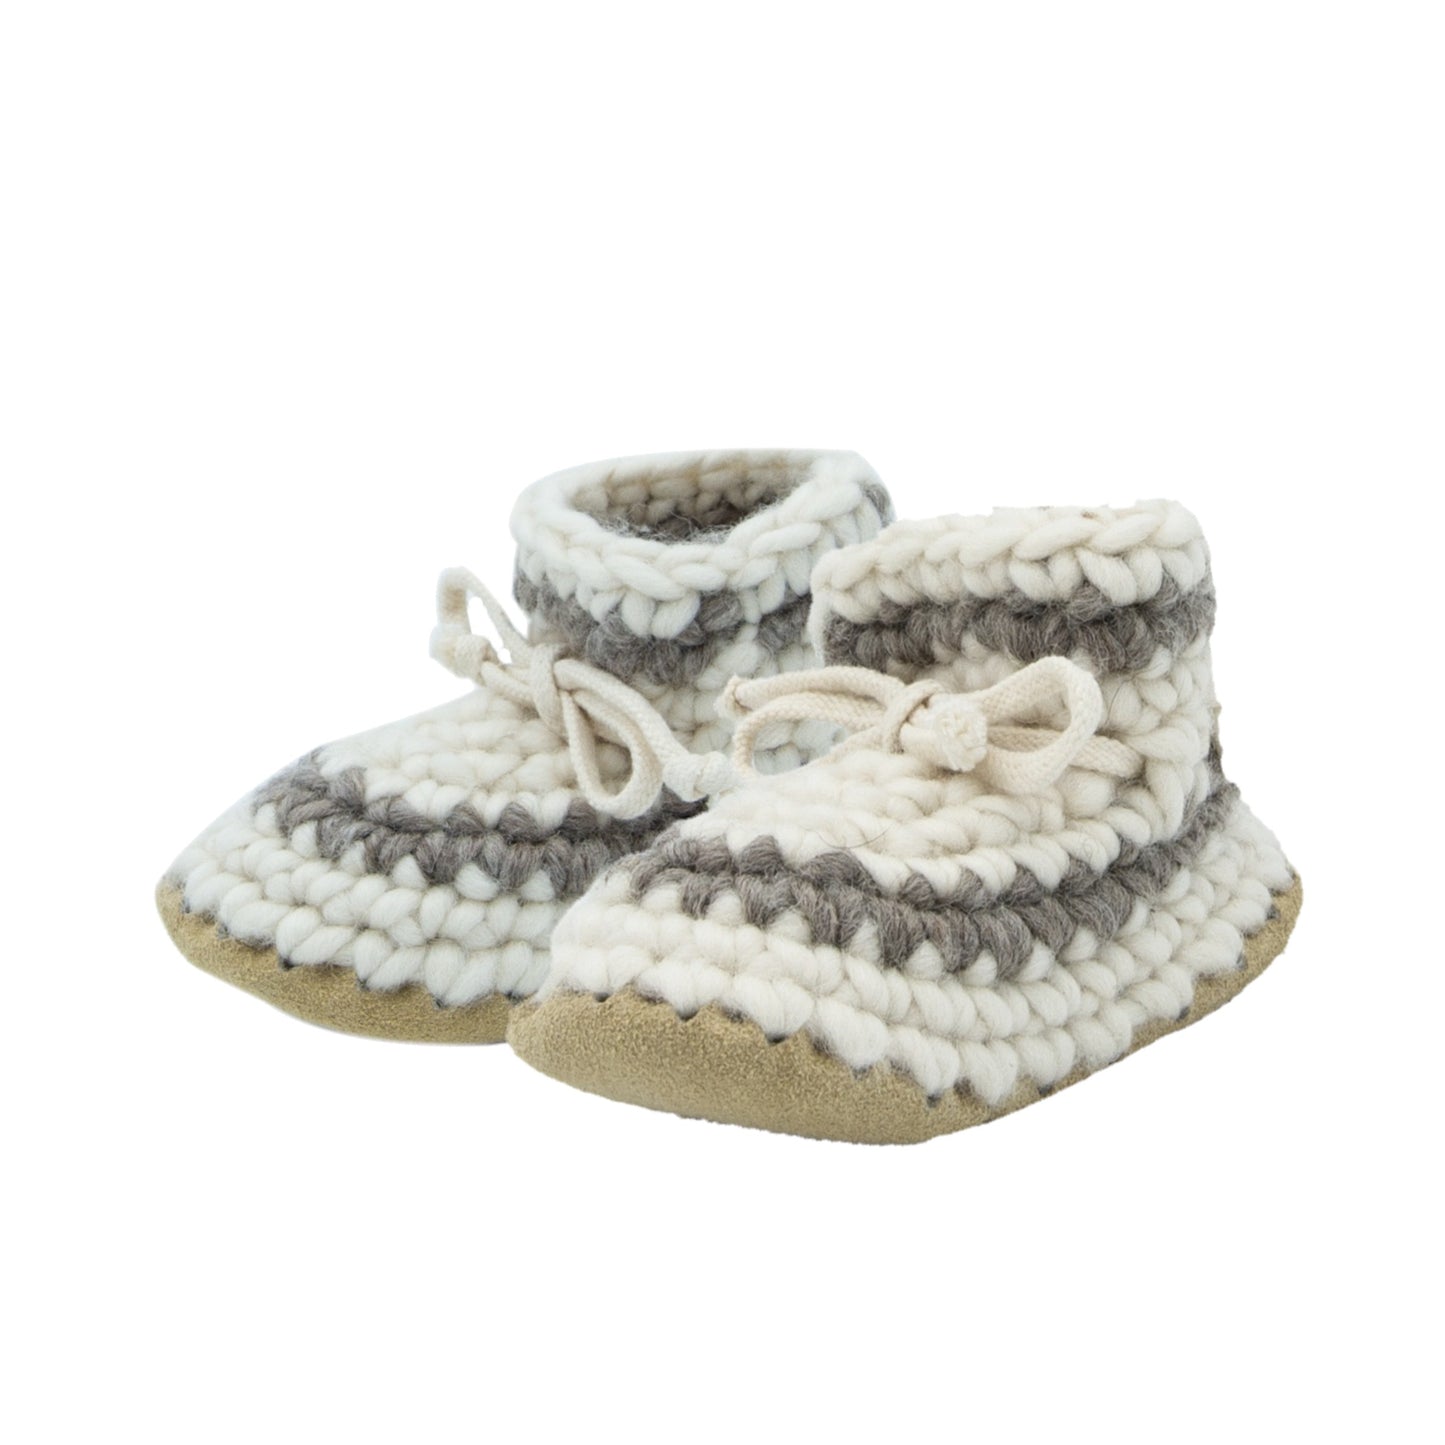 Crocheted Slippers - Newborn to Youth